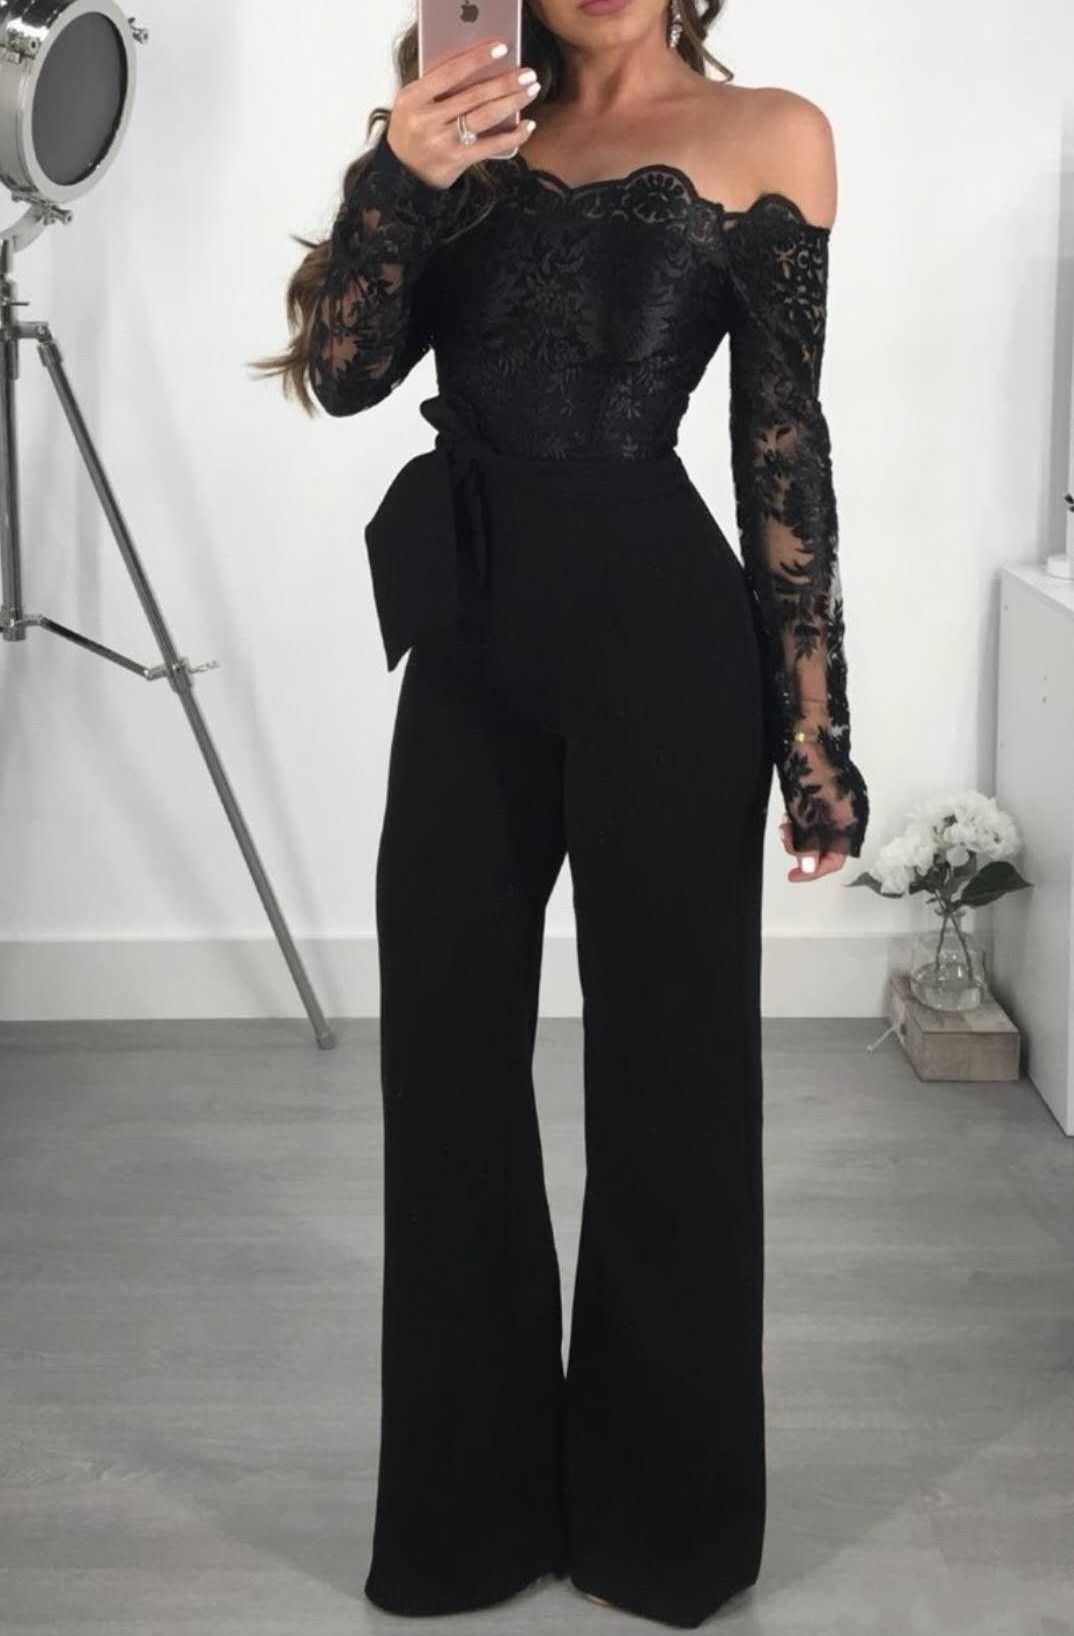 2019 Fashion Black Women Jumpsuits Off Shoulder Long Sleeves Special ...